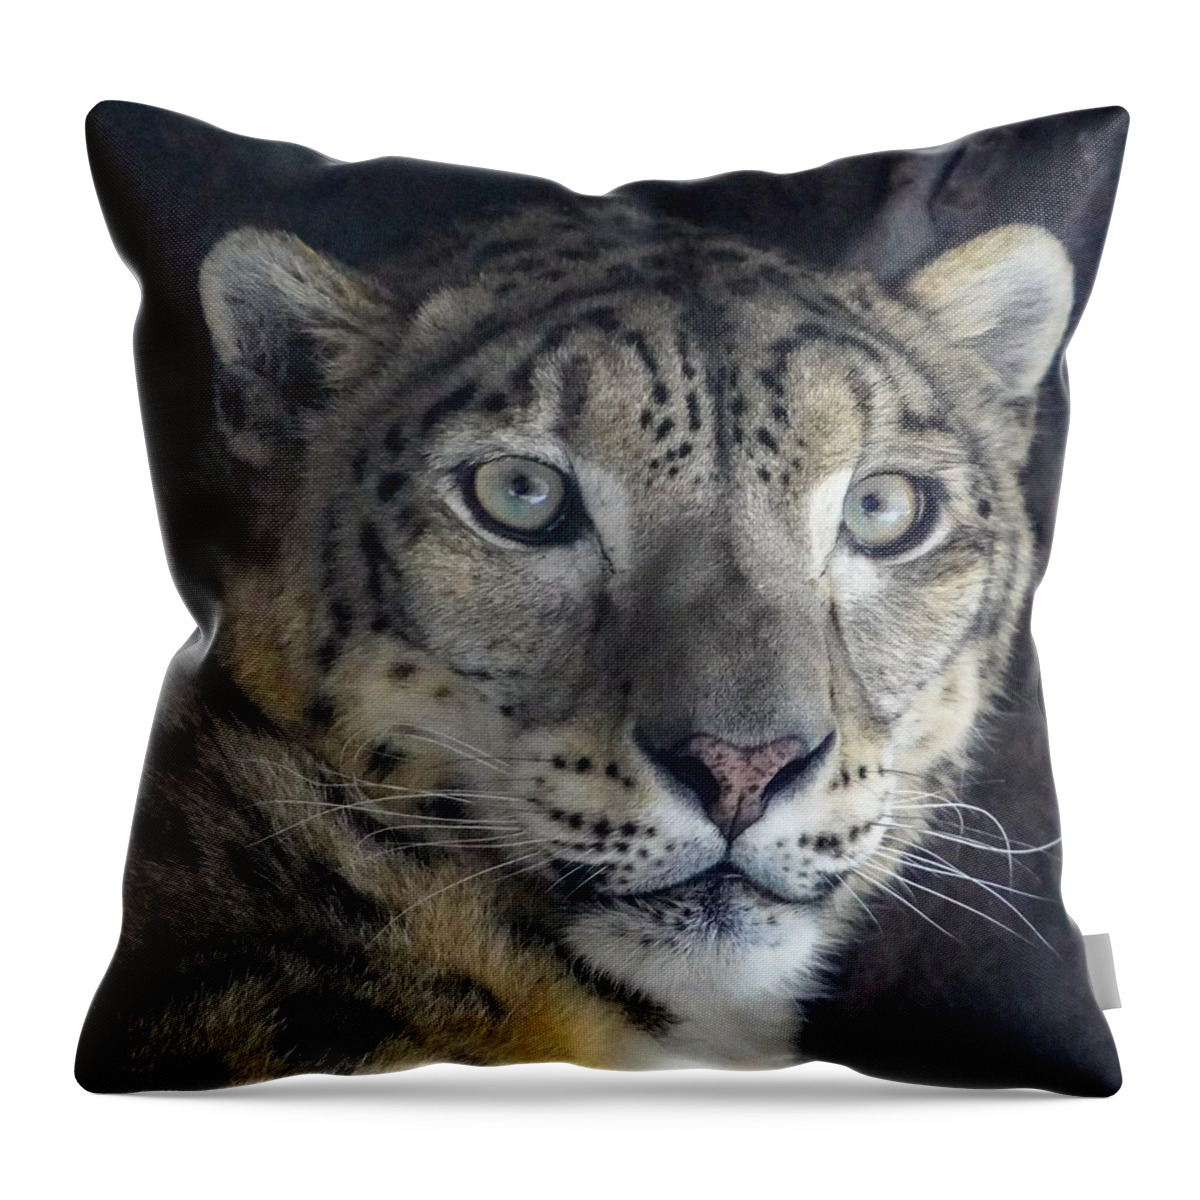 Snow Leopard Throw Pillow featuring the photograph Snow Leopard by Susan Rydberg